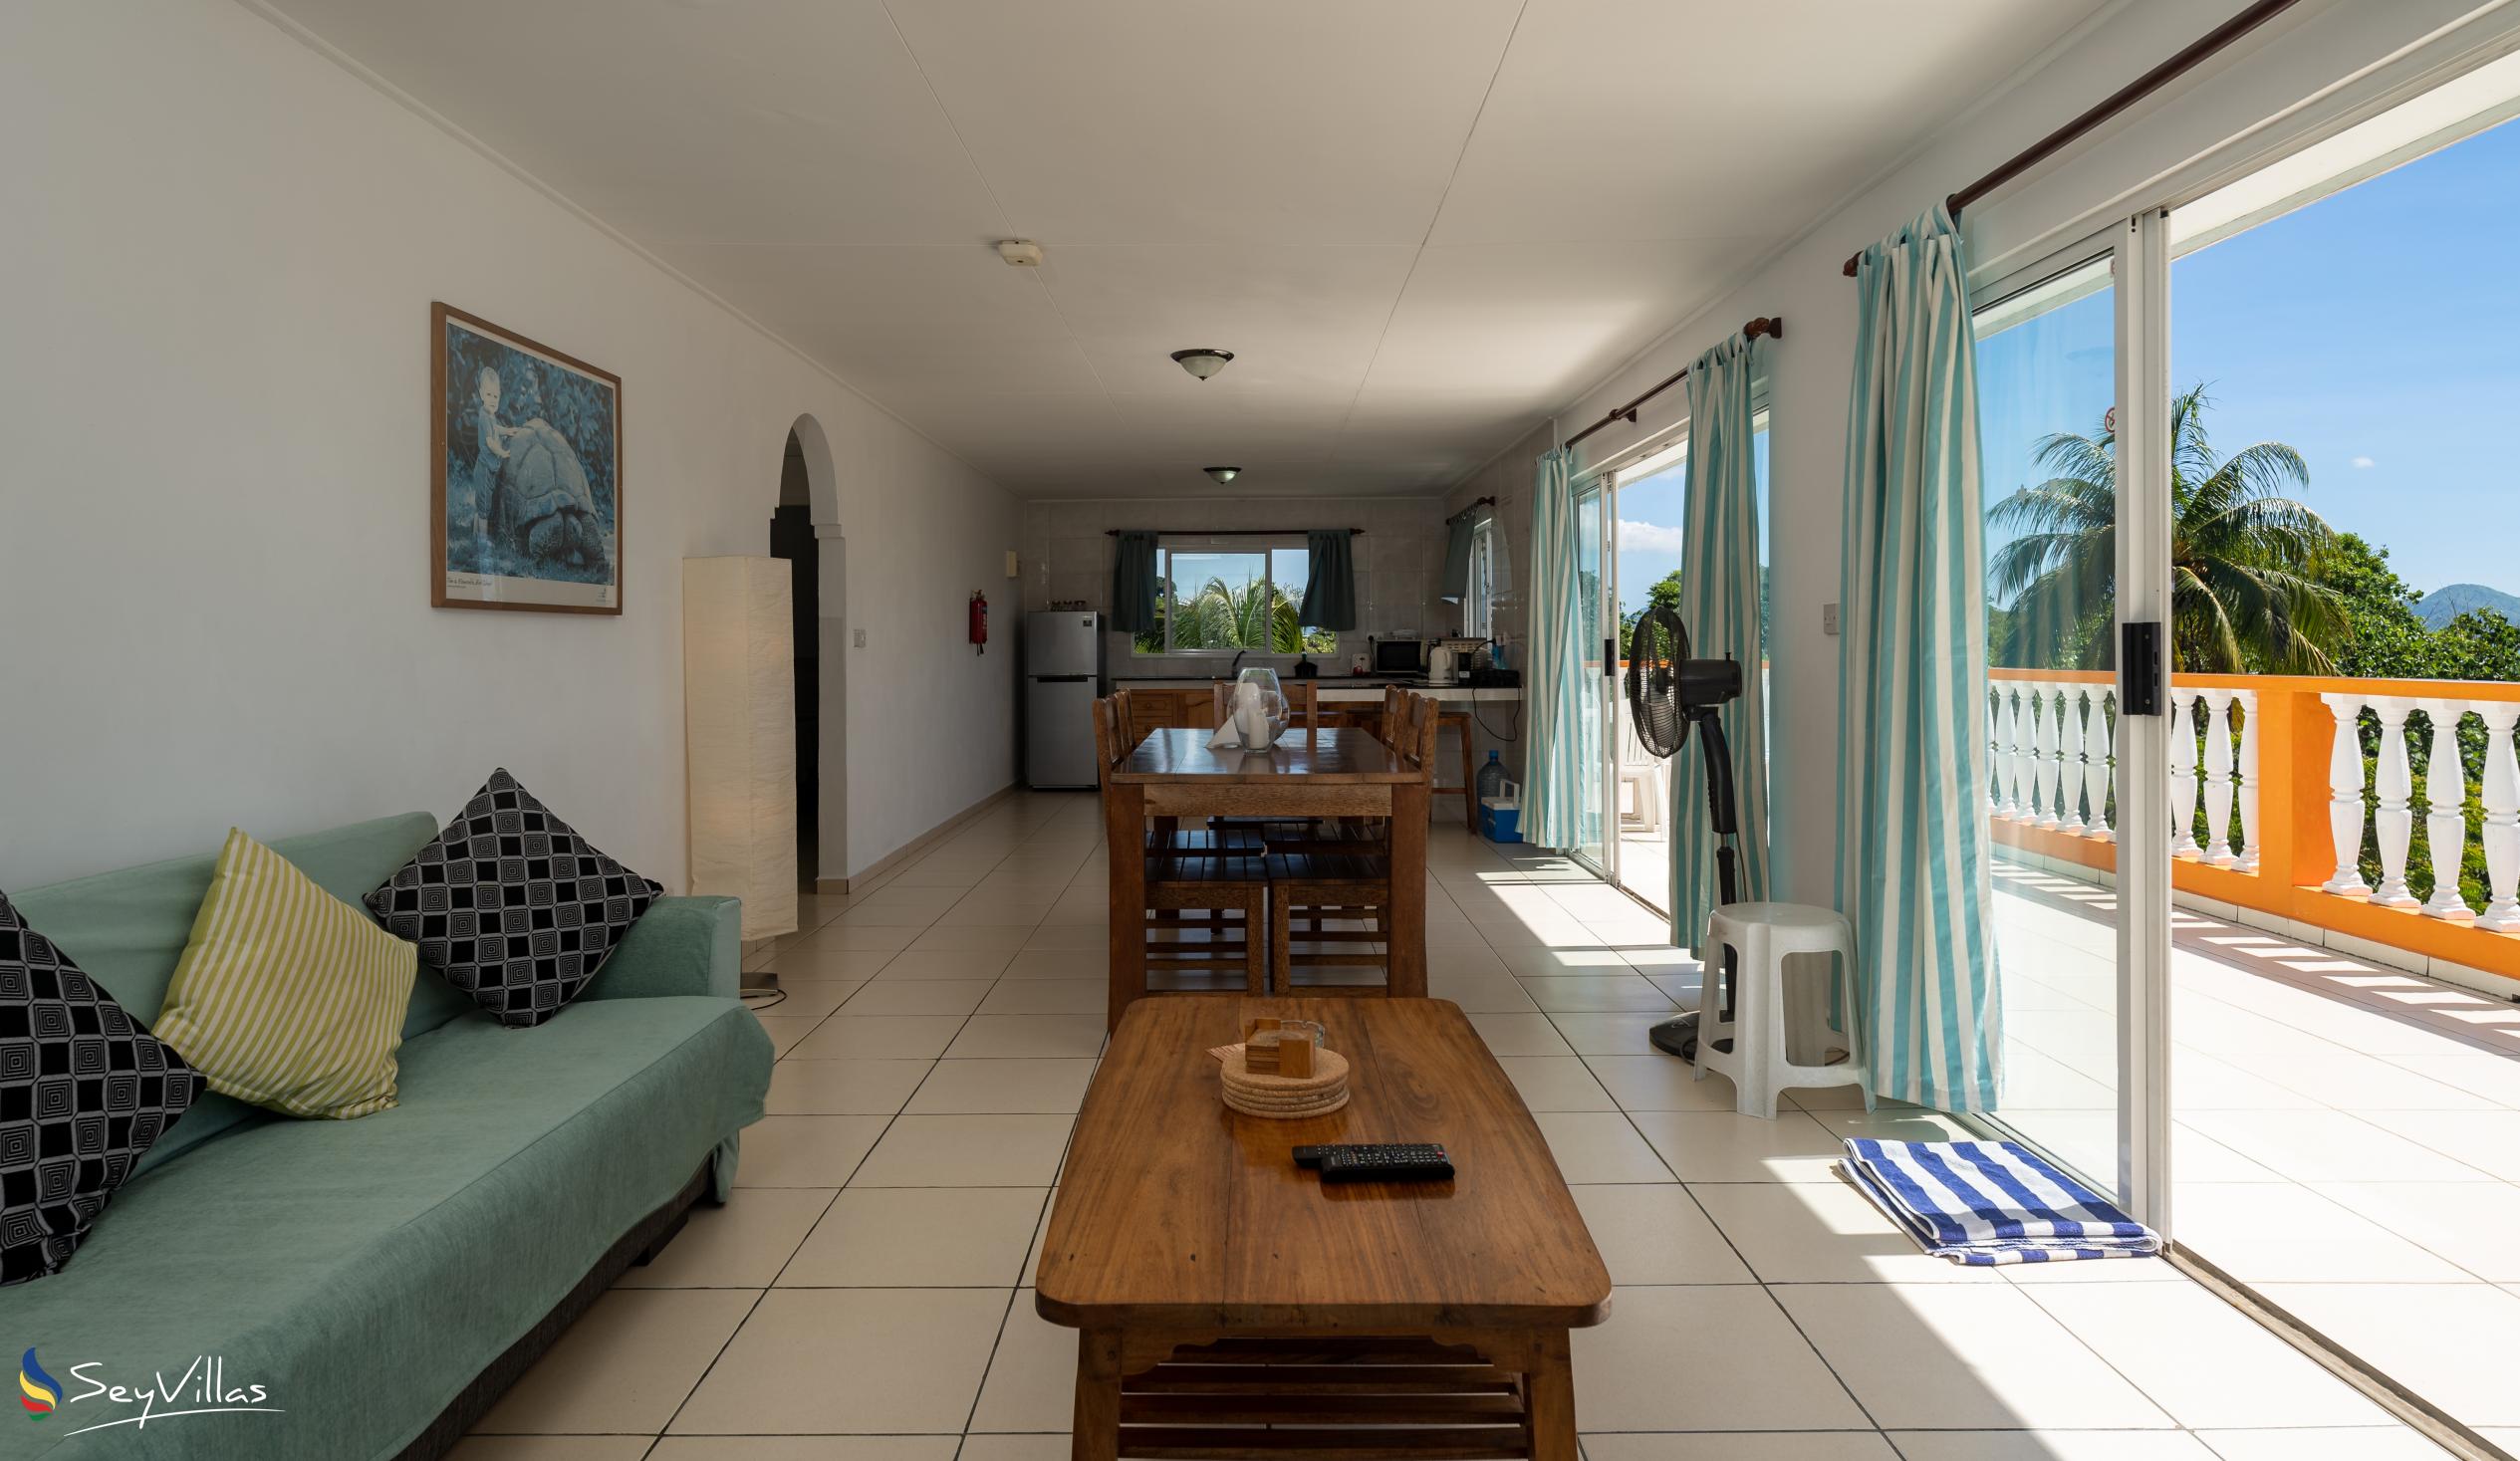 Foto 43: Chez Payet Self Catering - 2-Schlafzimmer-Appartement Coco - Mahé (Seychellen)